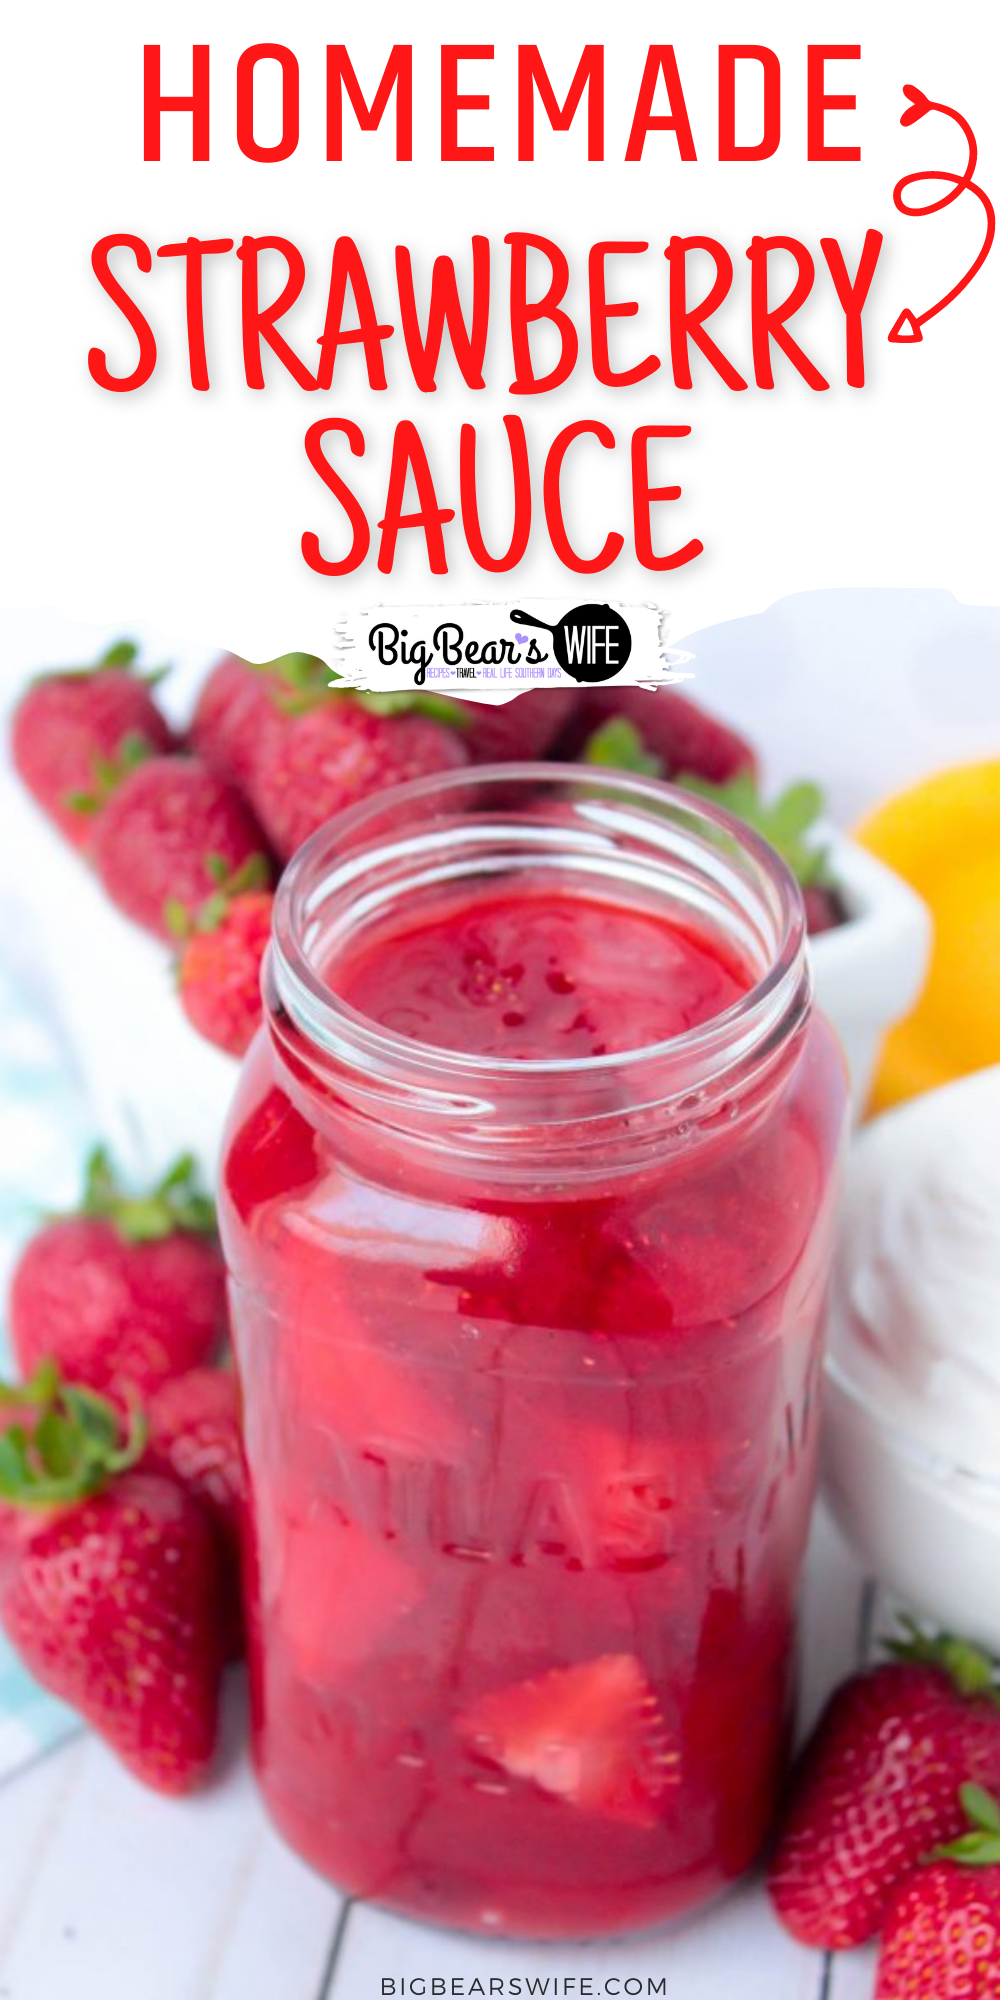 Sweet Homemade Strawberry Sauce that's perfect for topping ice cream, shortcakes and yogurt! It's so good that you could even eat it with a spoon with some cool whip! via @bigbearswife